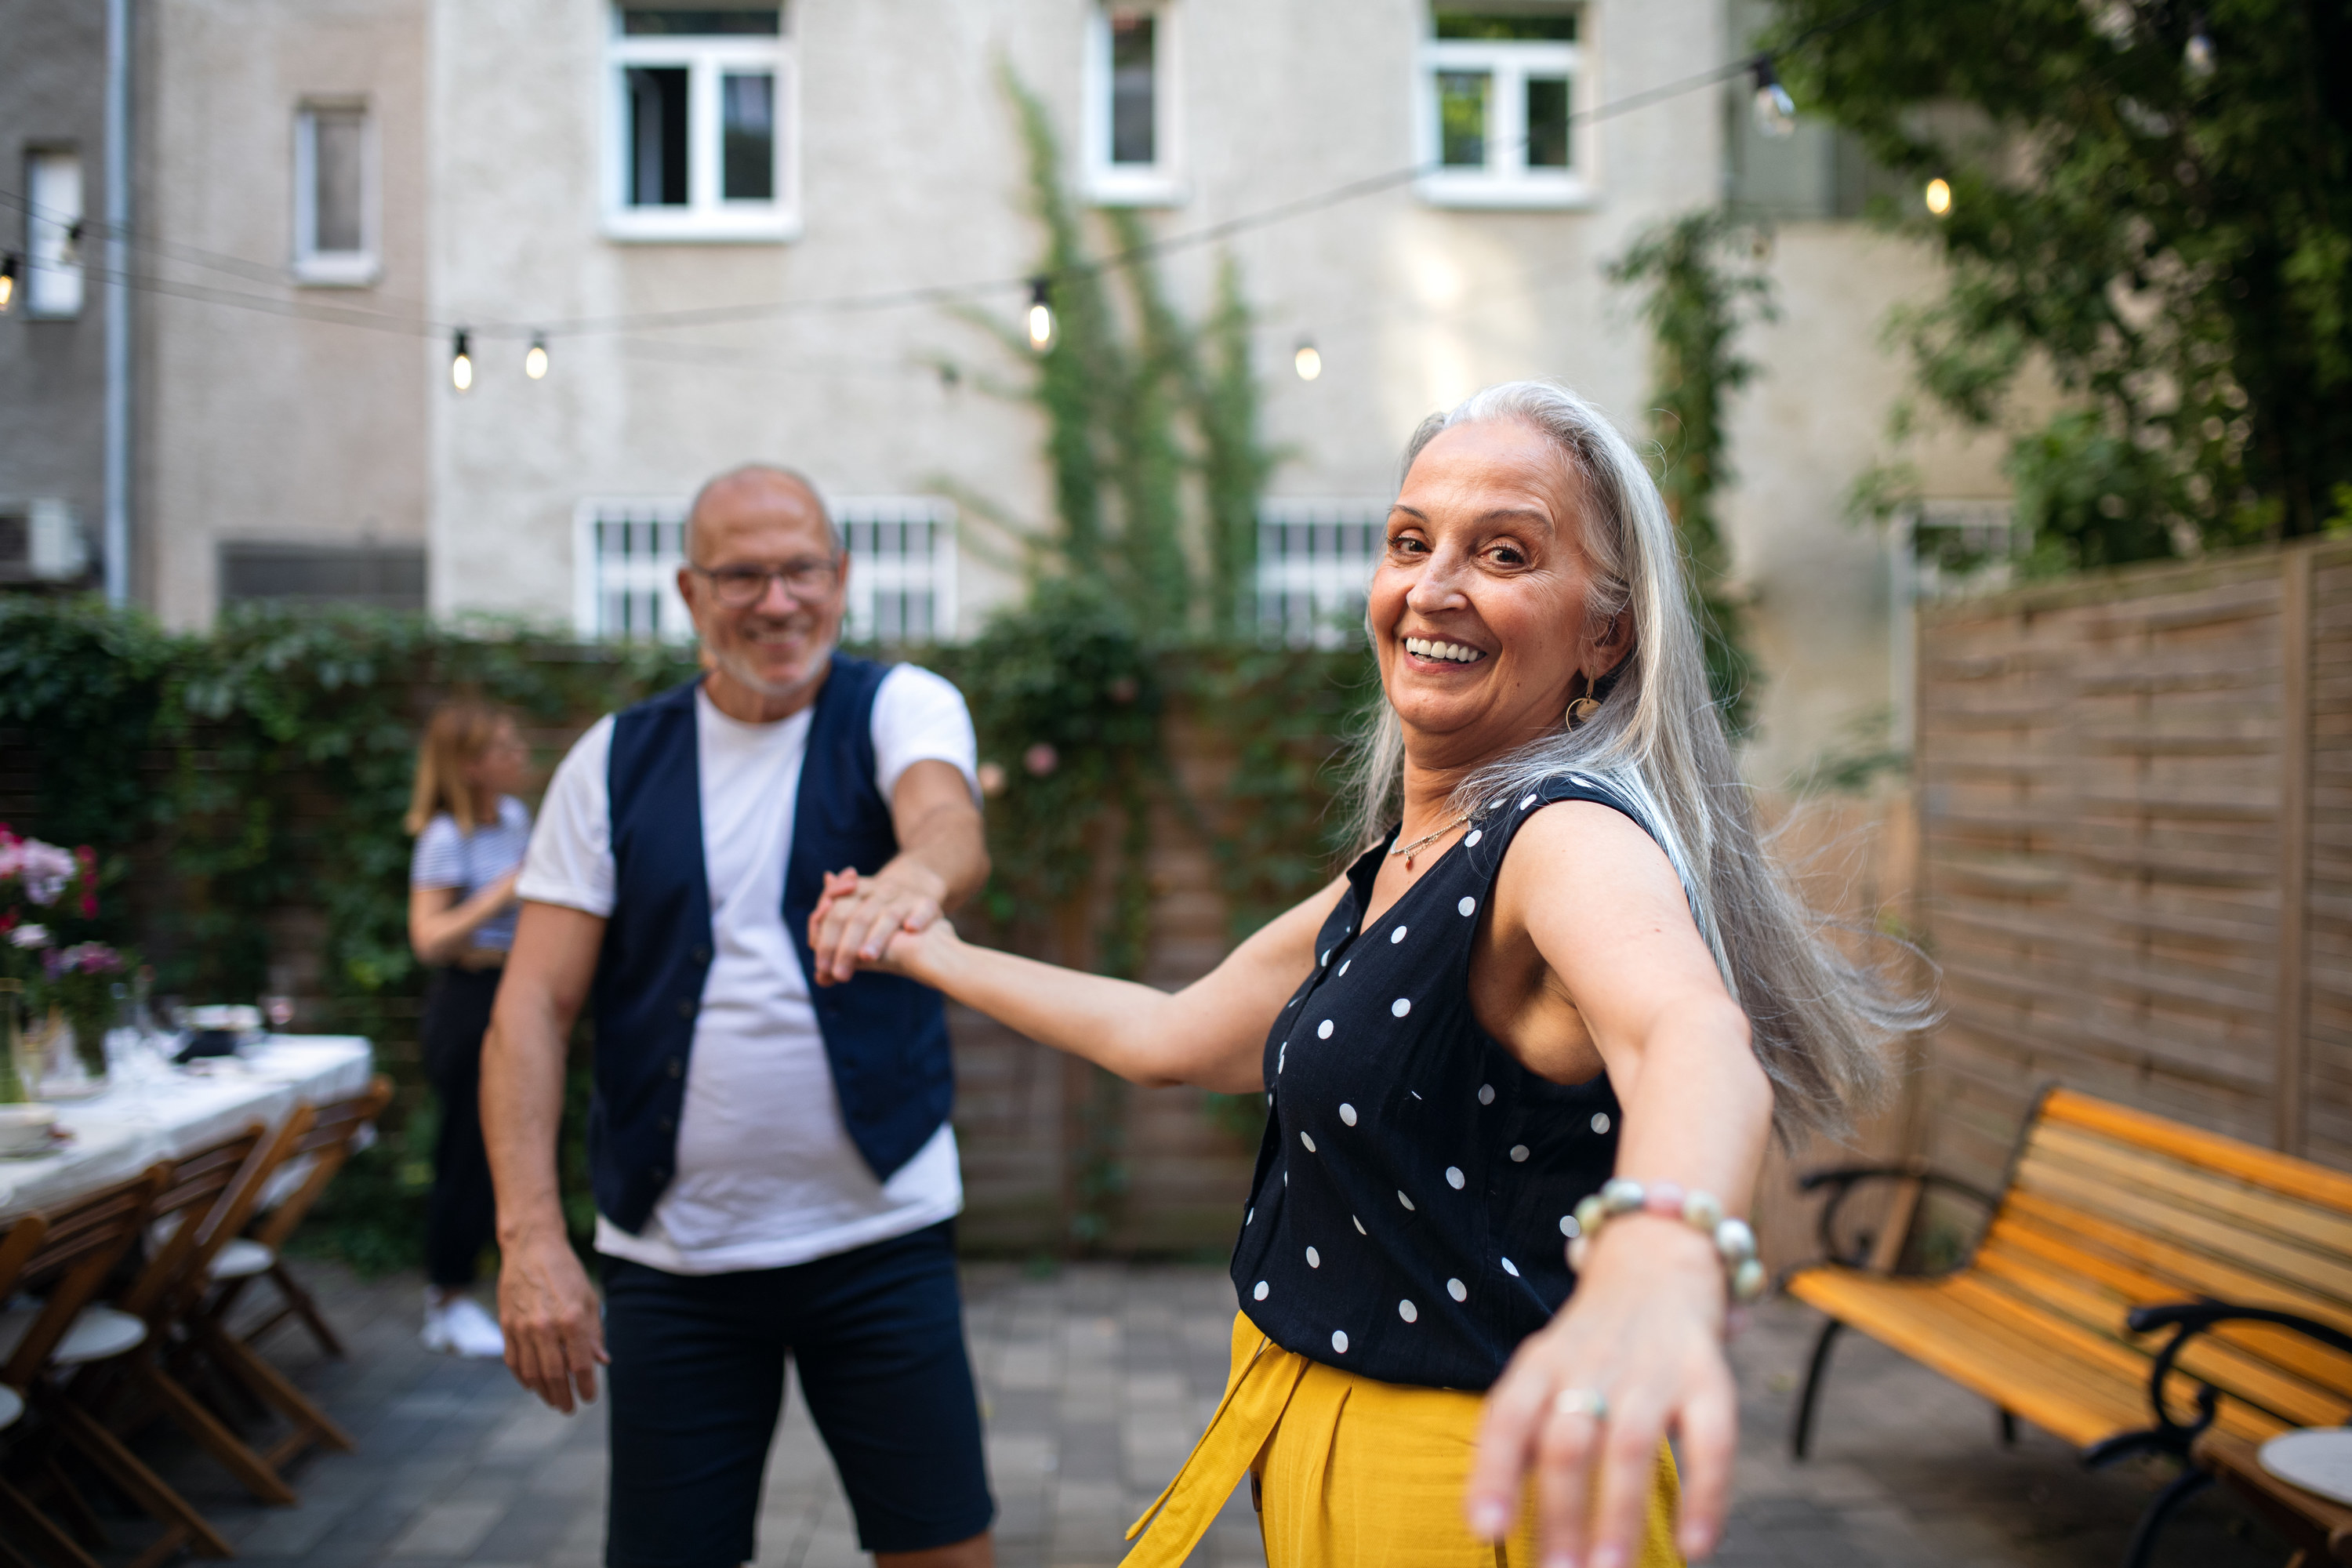 older couple dancing together in a backyard